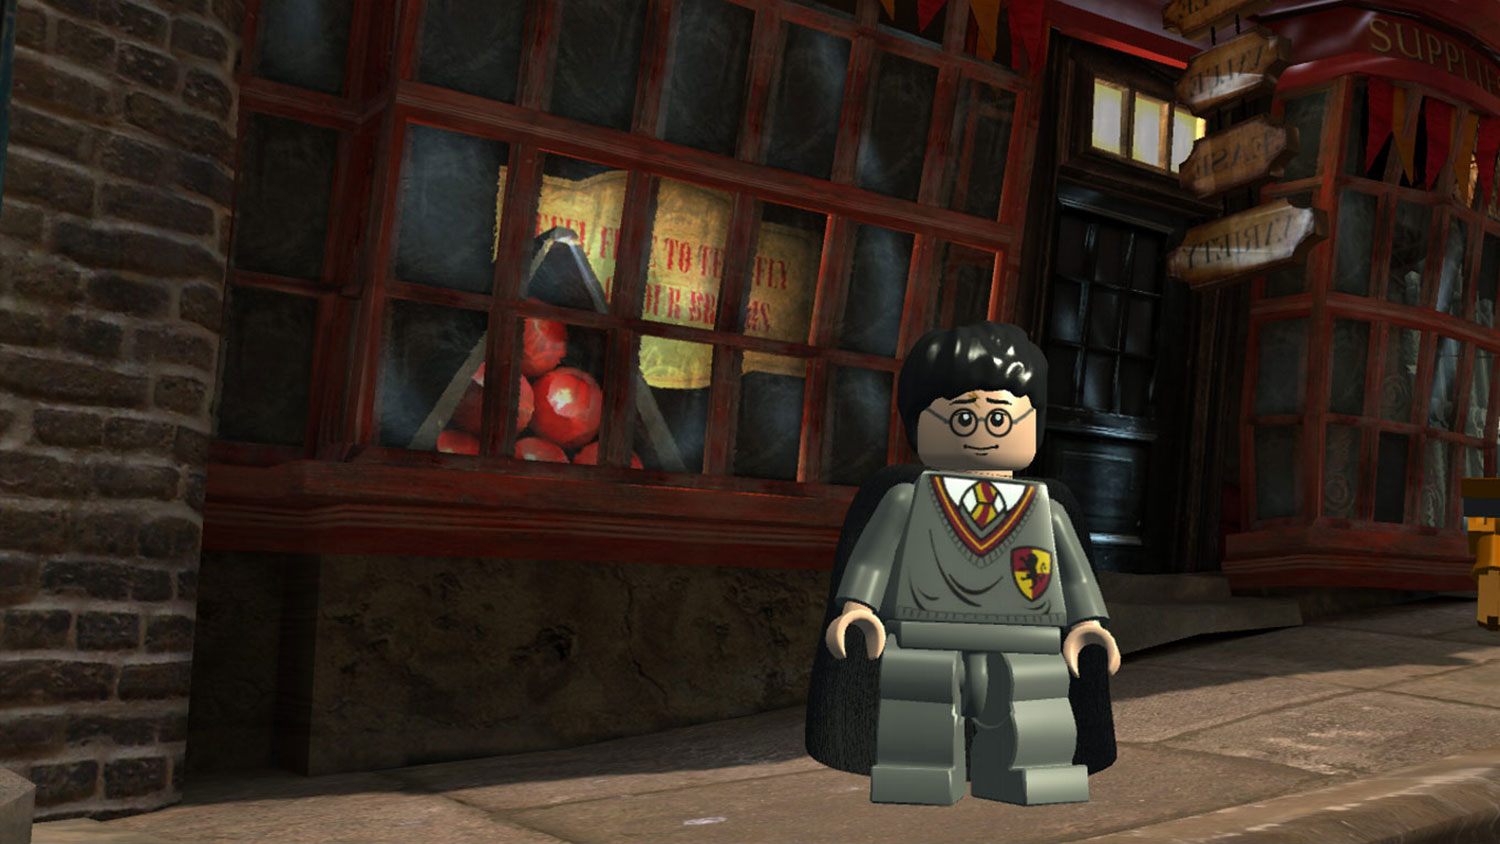 svinge Perpetual Rejse Lego Harry Potter Collection Could Be On Its Way To PS4 | Digital Trends